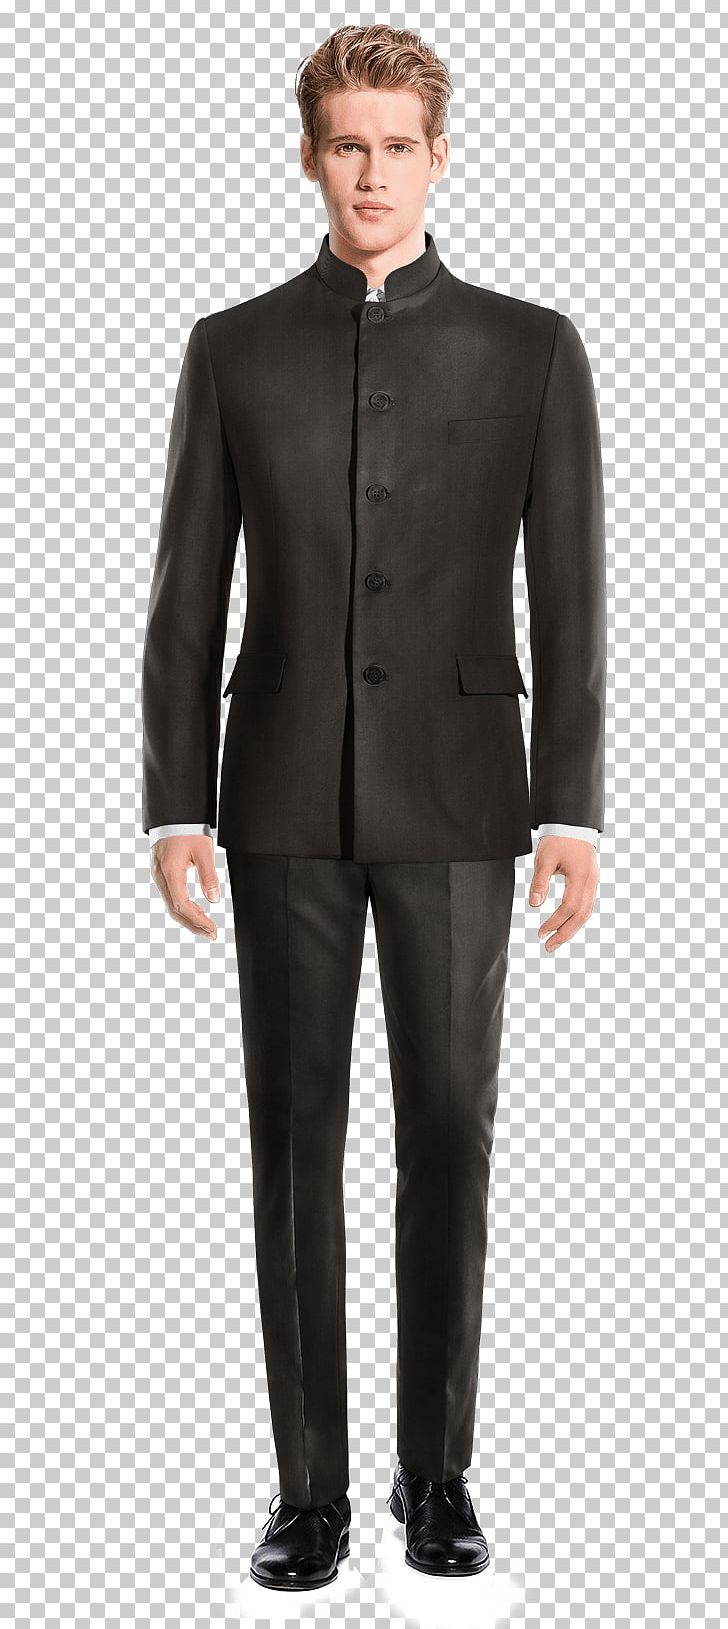 Tweed Mao Suit Tuxedo Pants PNG, Clipart, Black Suit, Blazer, Businessperson, Chino Cloth, Clothing Free PNG Download